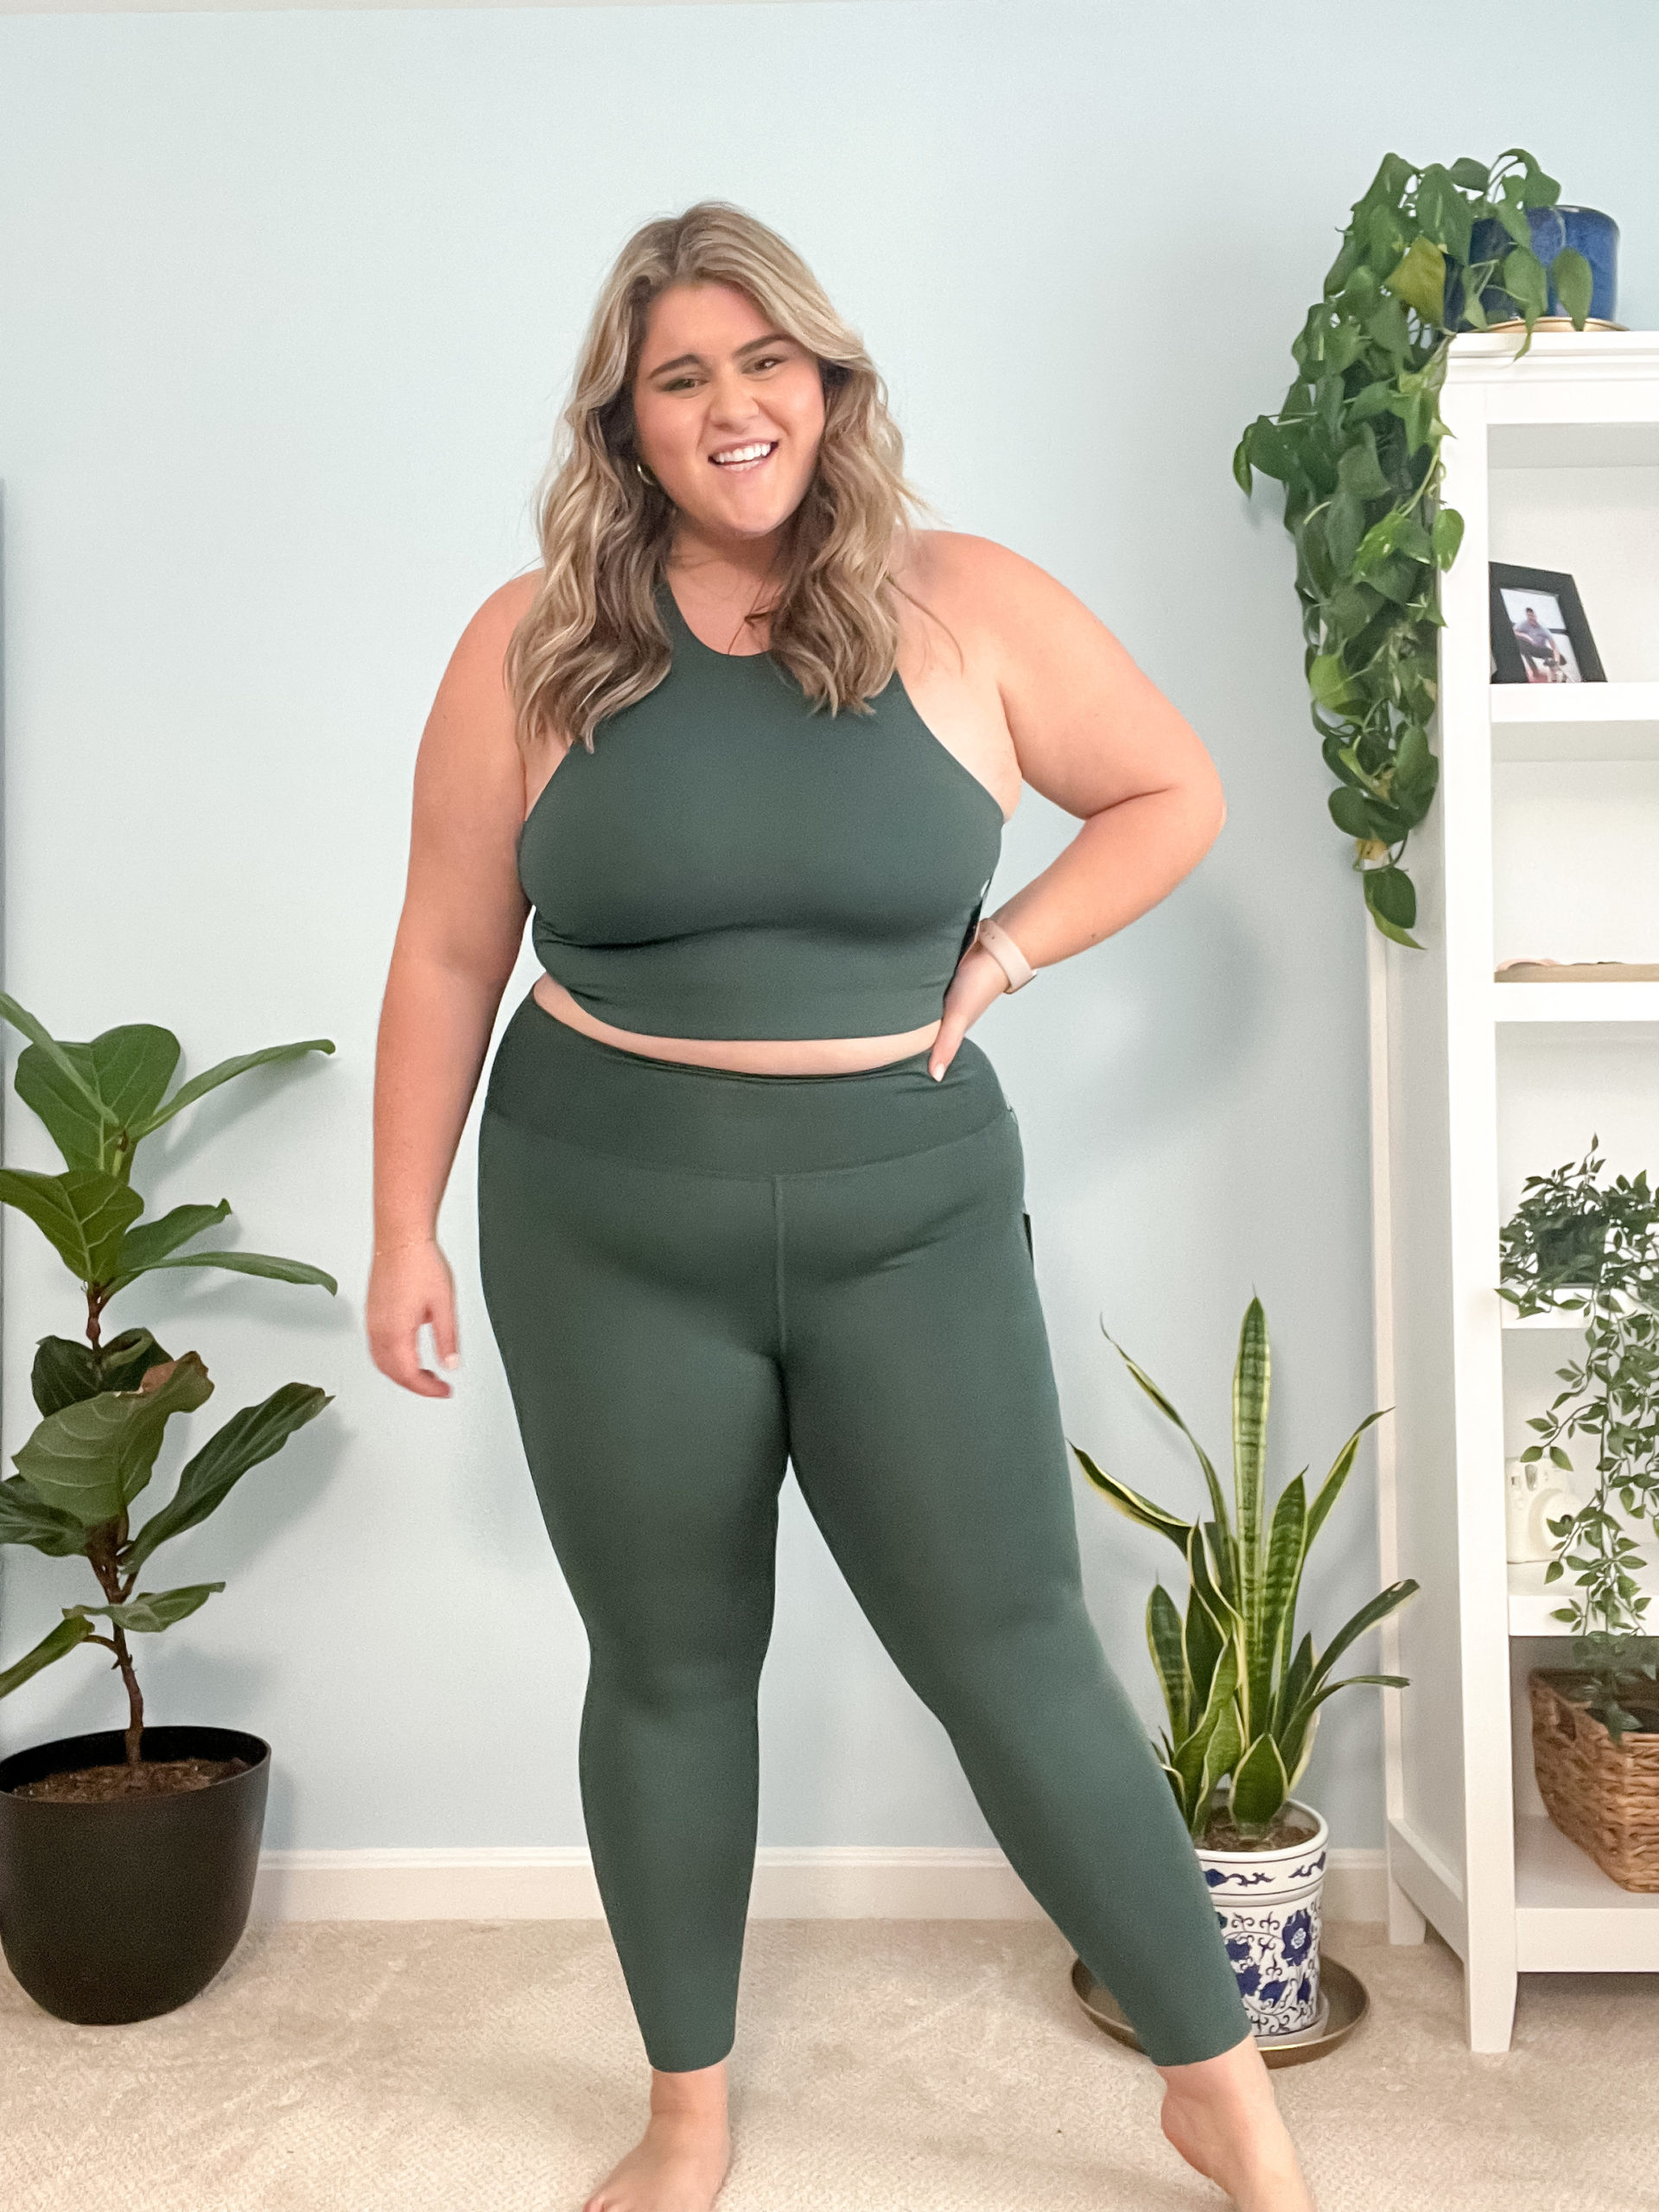 Plus Size Activewear Try on Haul